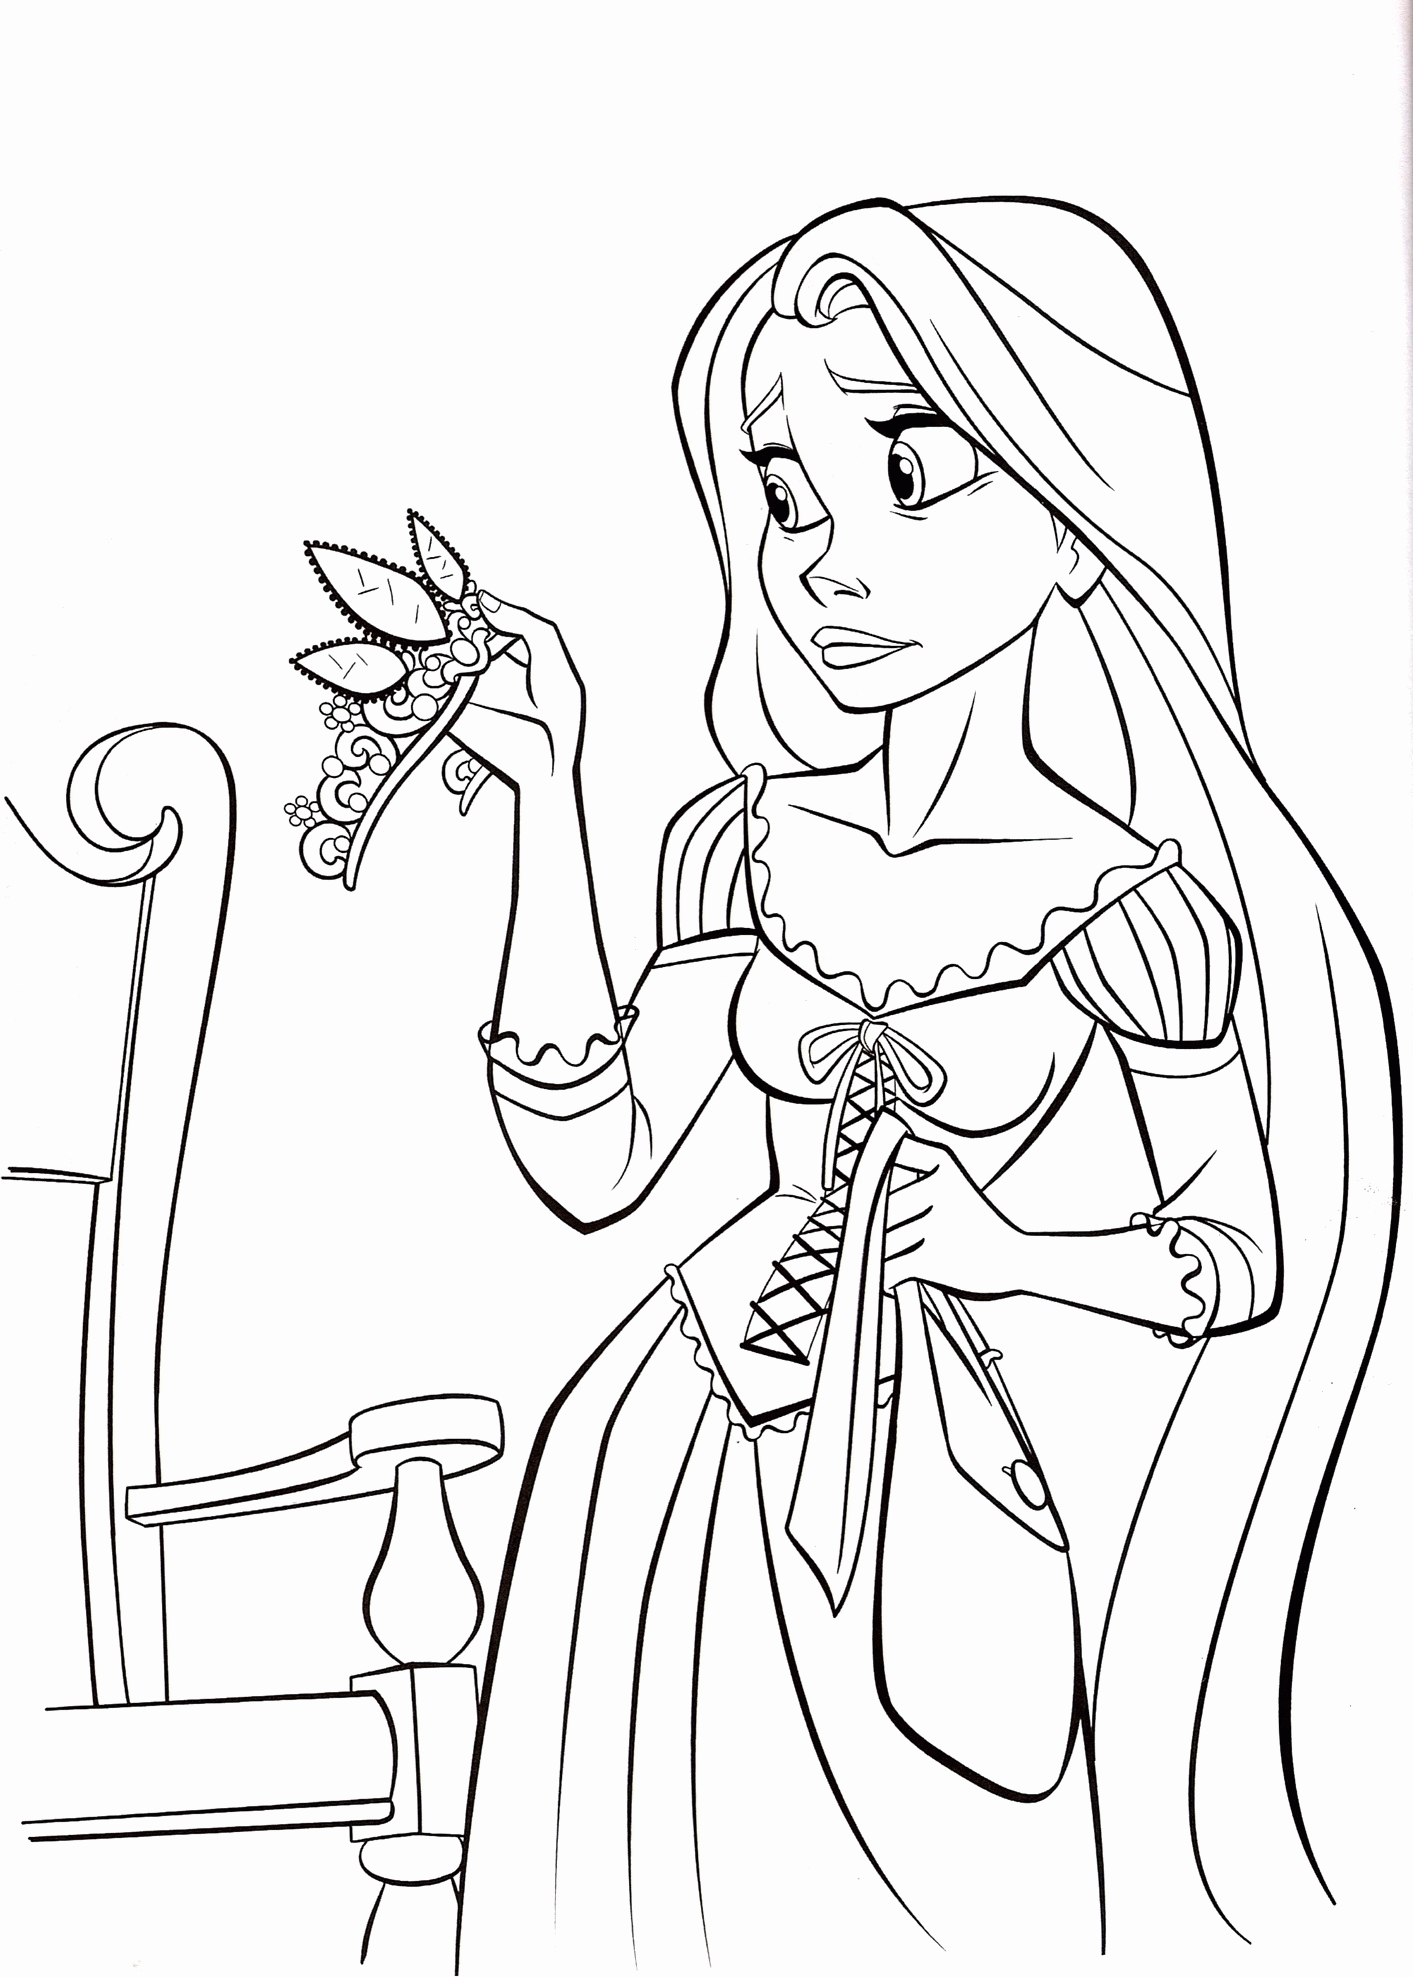 Amazing of Gallery Of Free Coloring Pages Of Disney Chara #2100